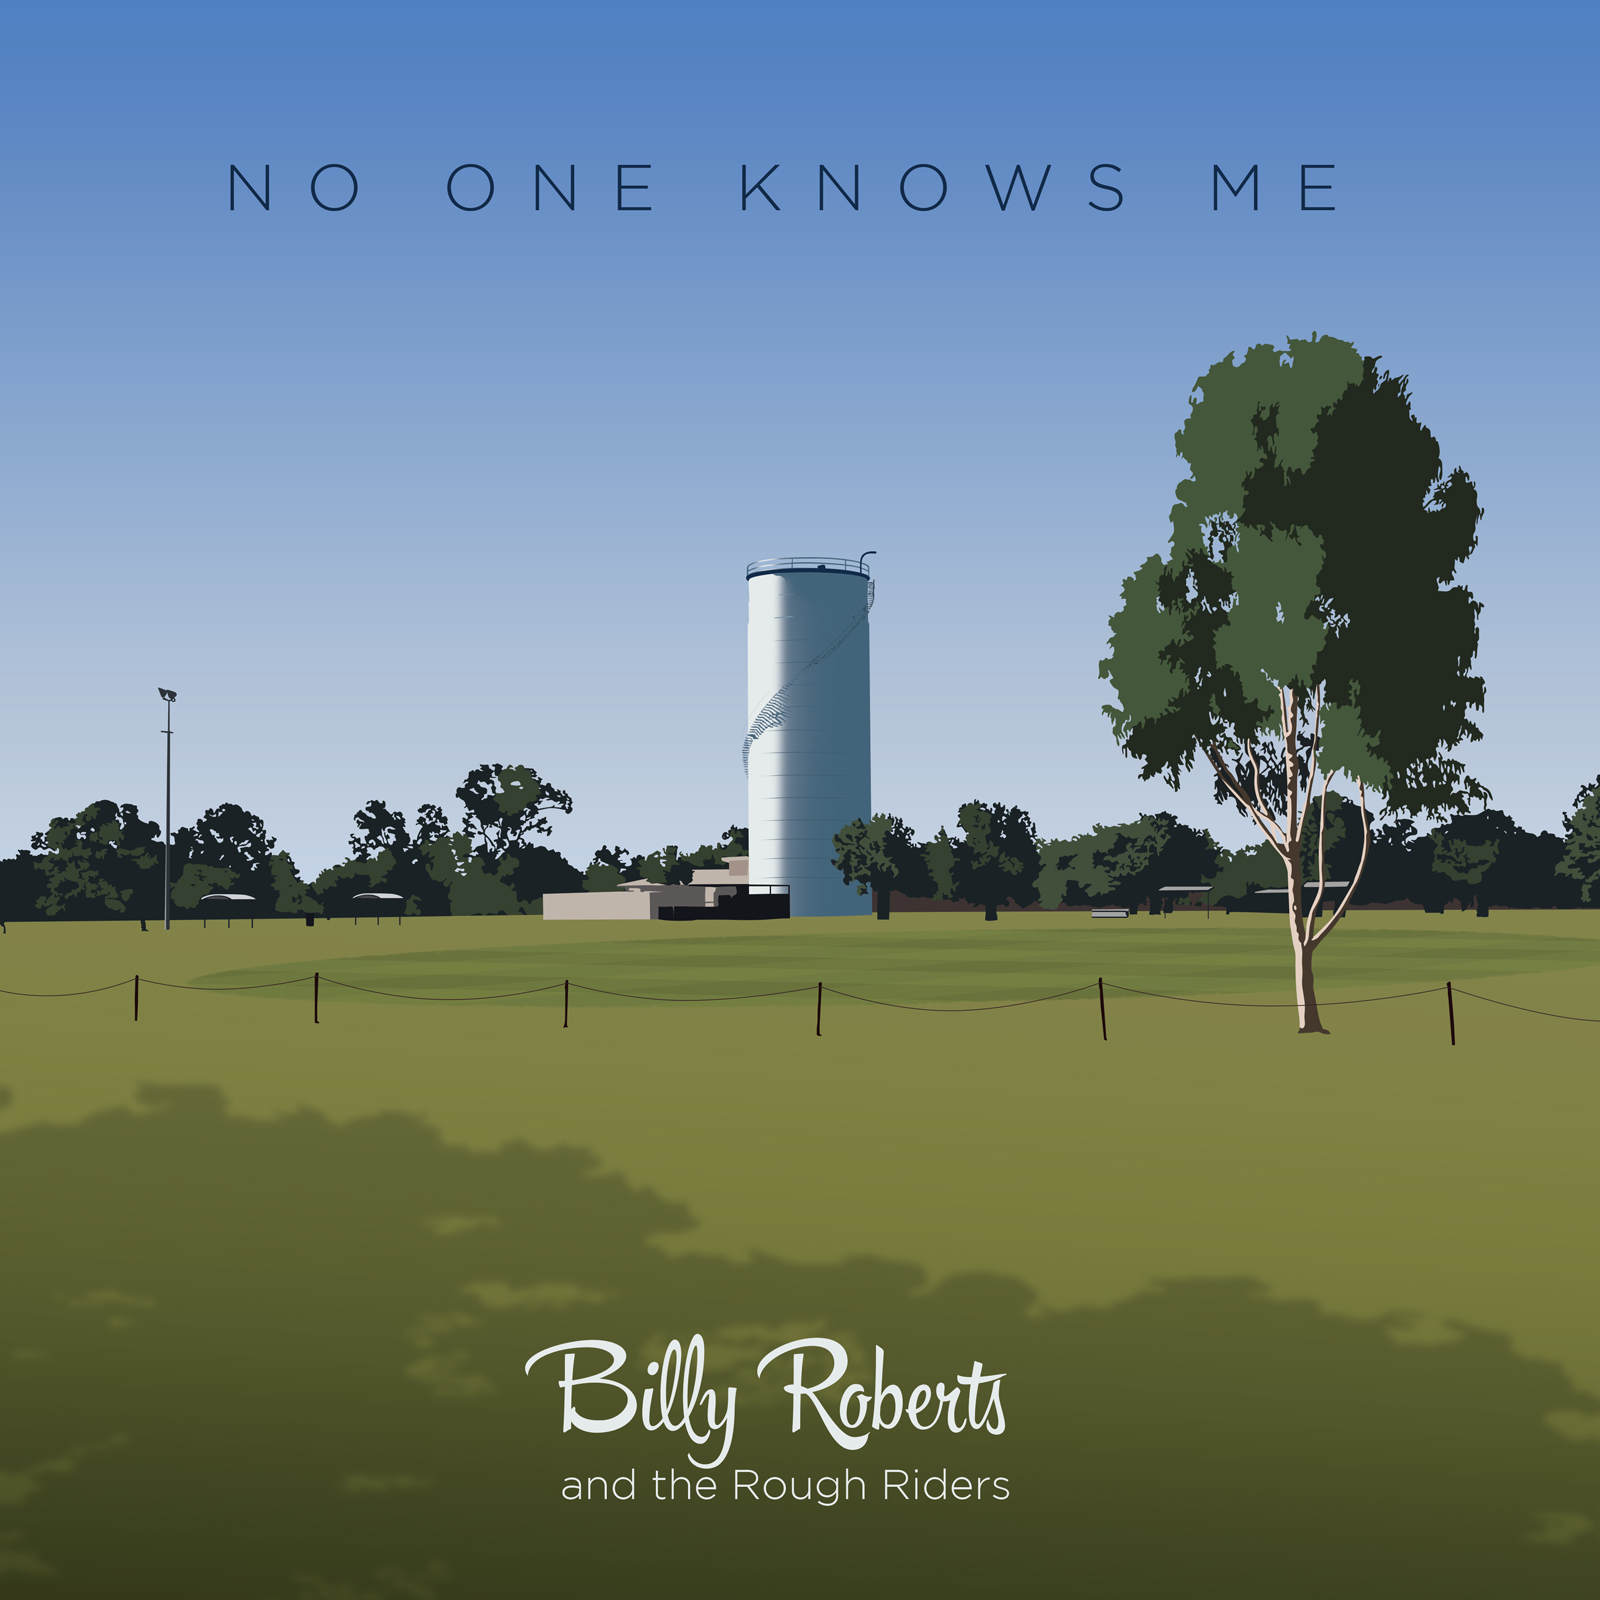  Billy Roberts And The Rough Riders – “No One Knows Me”